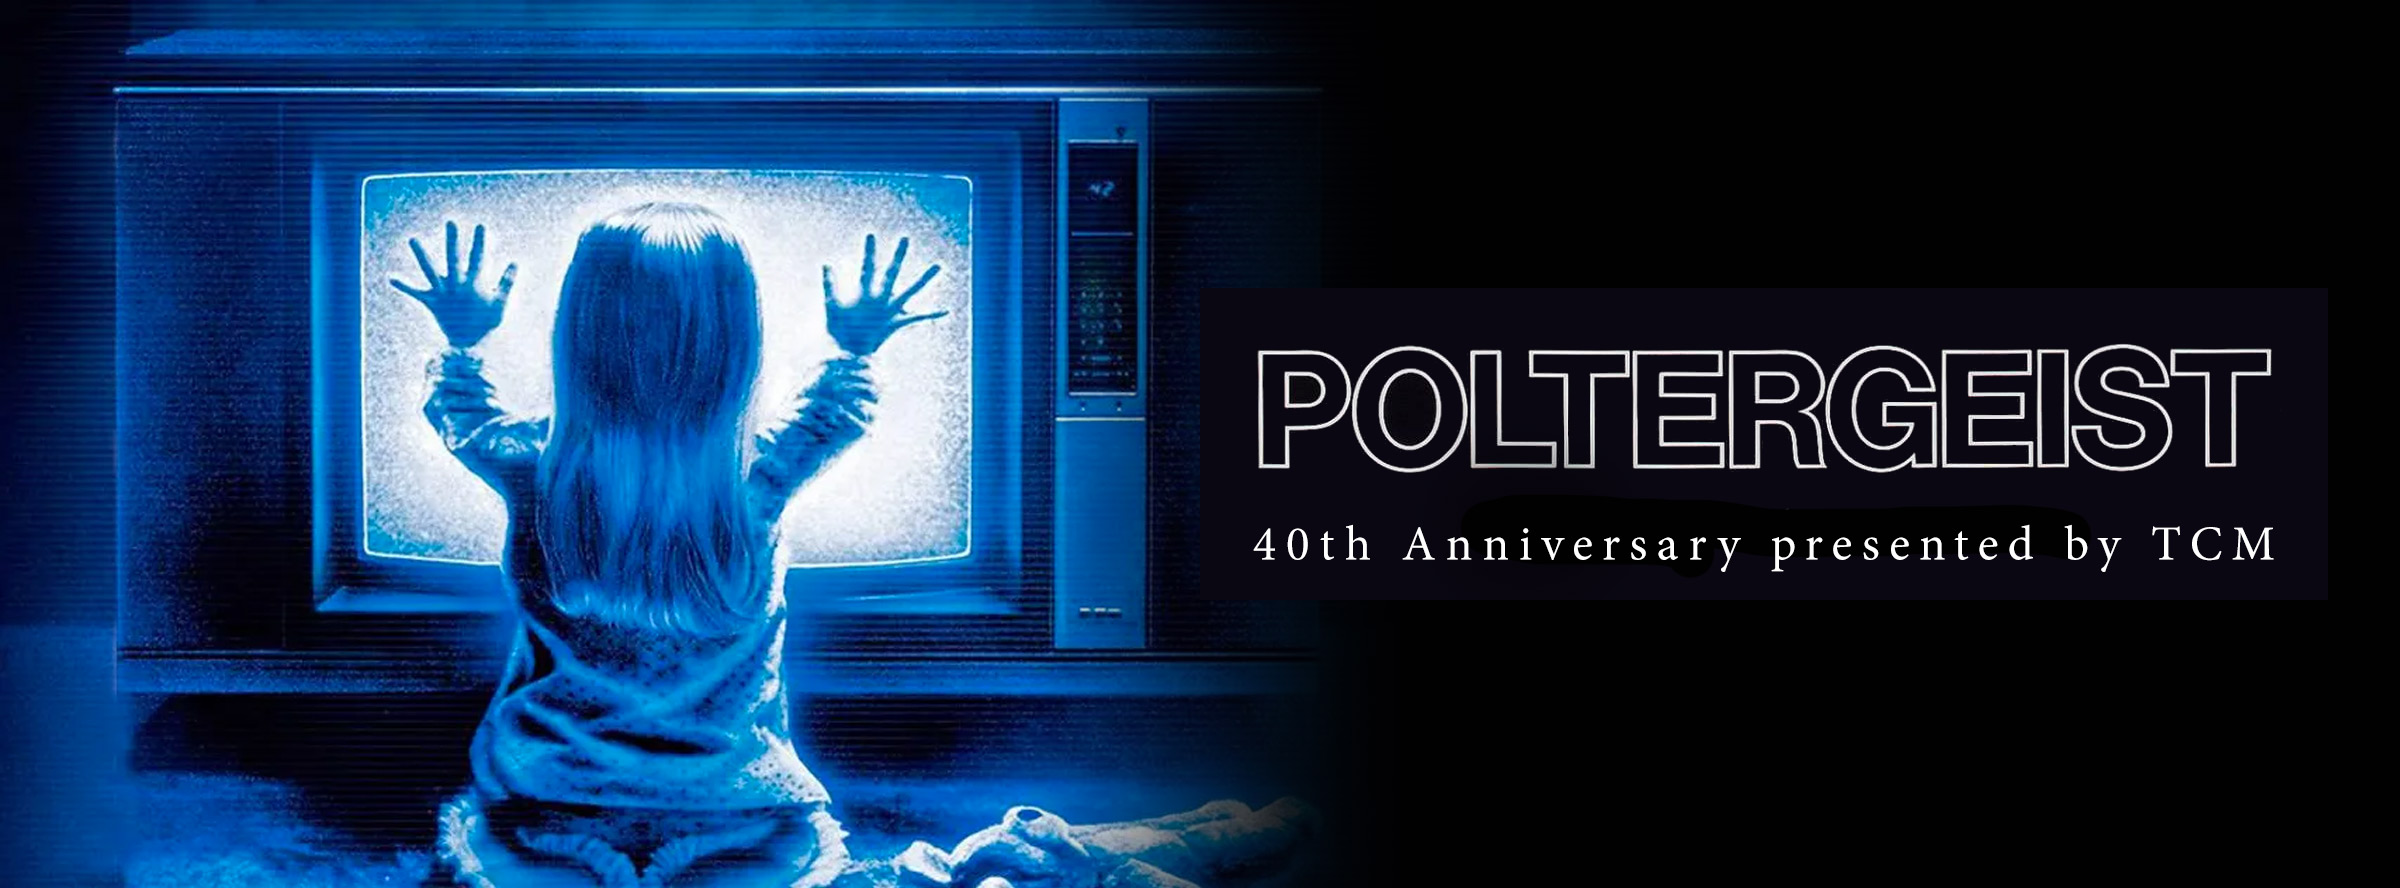 Slider Image for Poltergeist 40th Anniversary presented by TCM